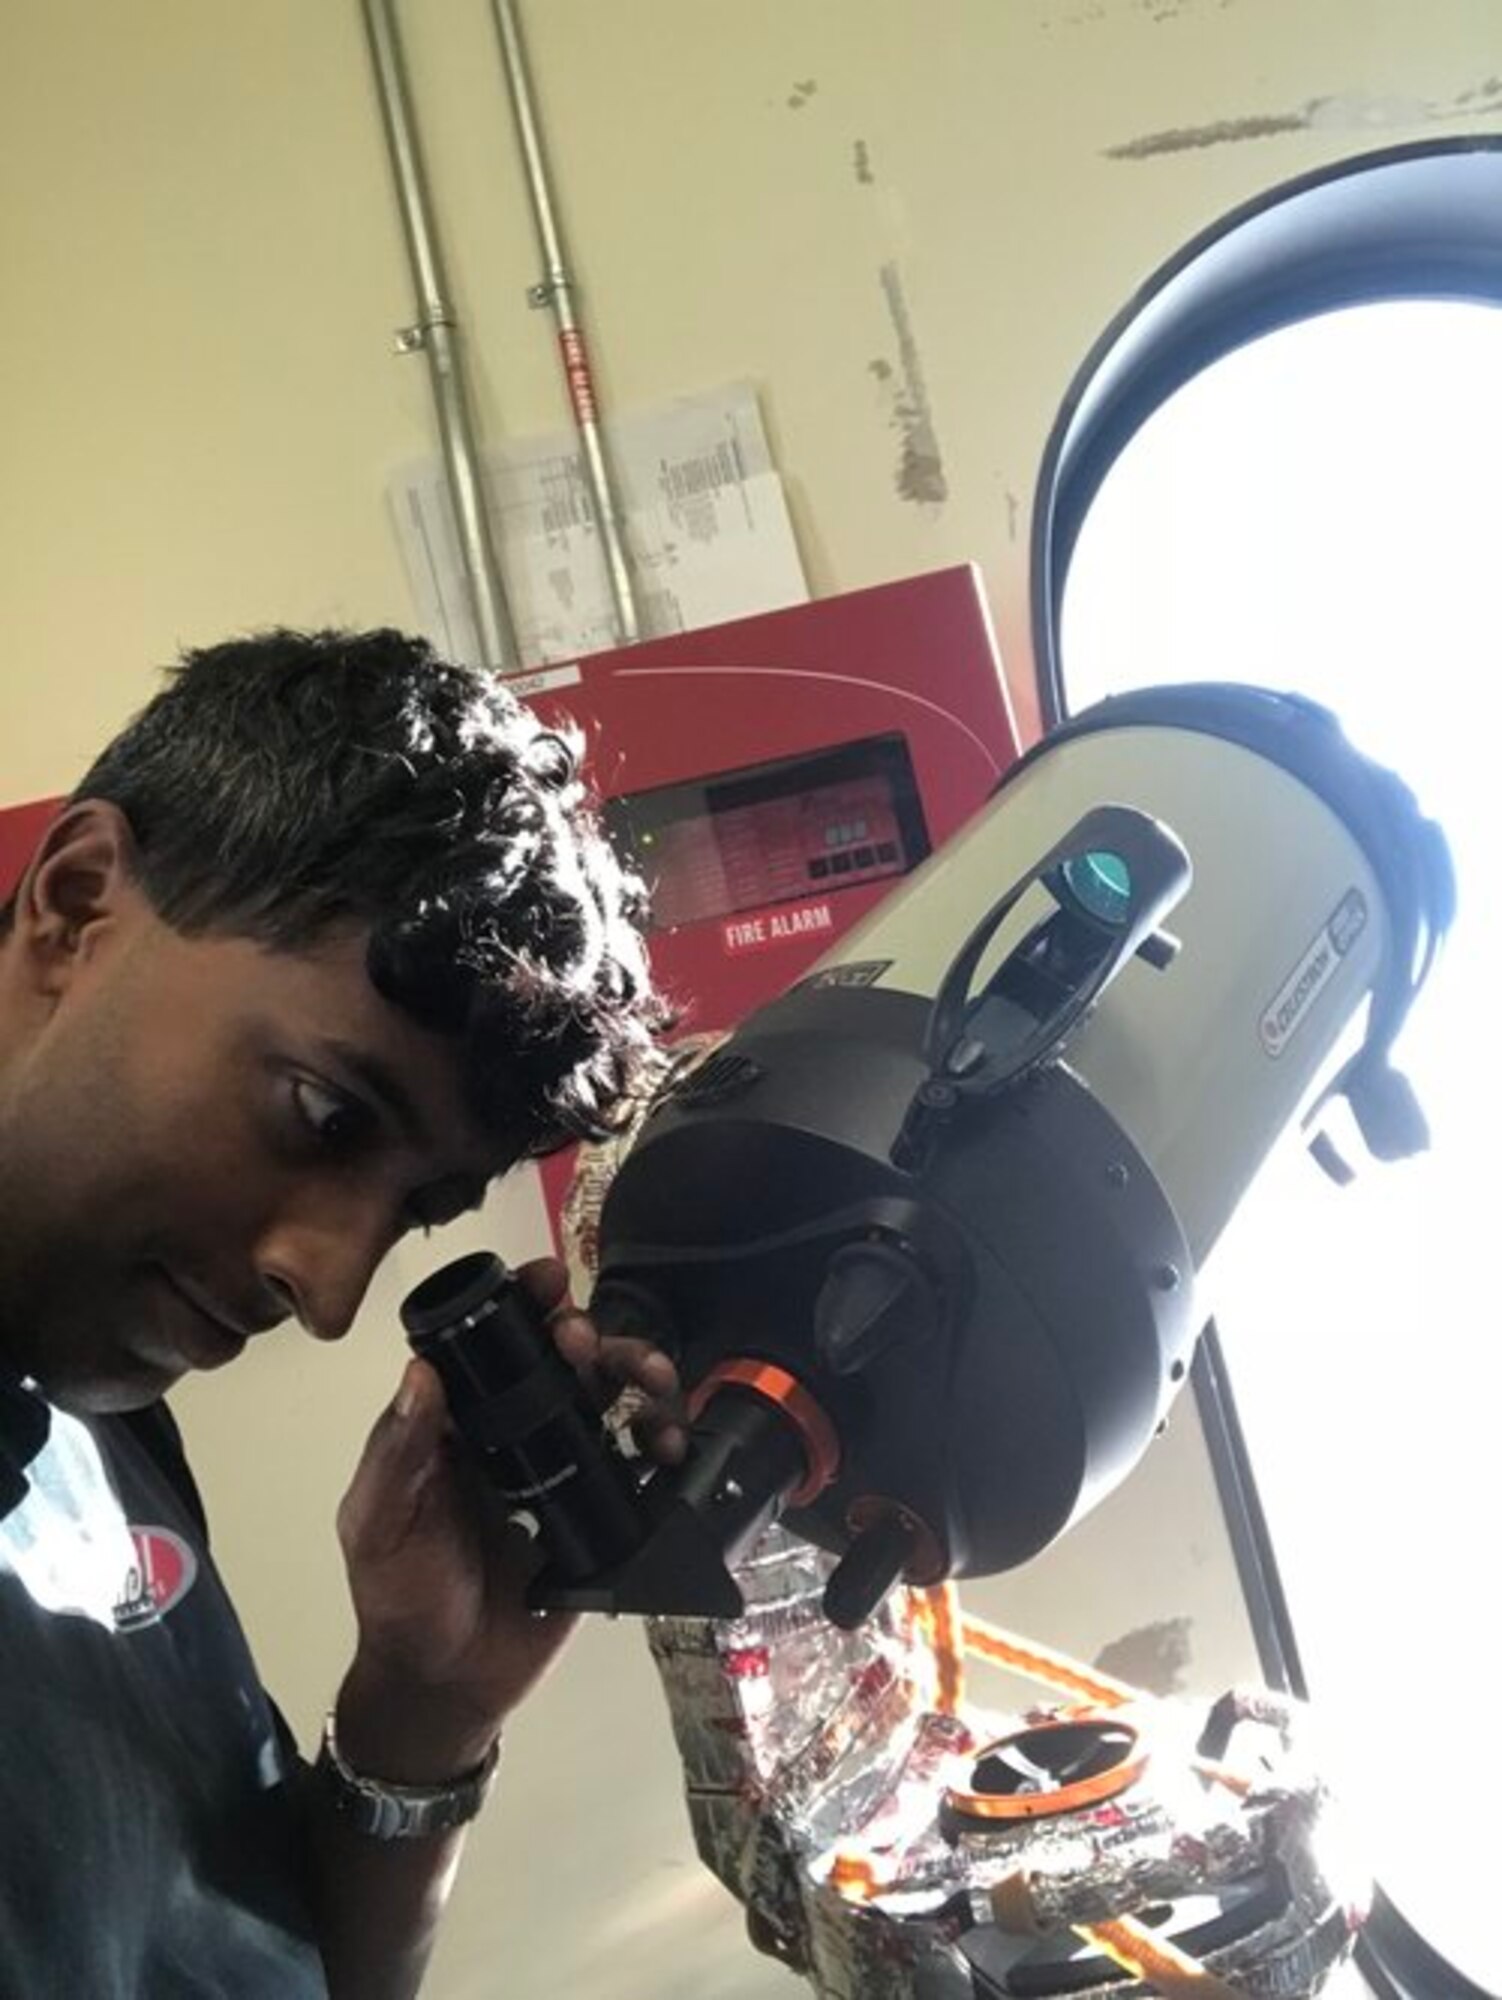 Capt. Michael Nayak, an AFRL scientist, tests the ability of the telescope (and the operator) to acquire and track stars during the daytime. This is a very demanding task due to the bright reflections from the ice. (Courtesy photo)